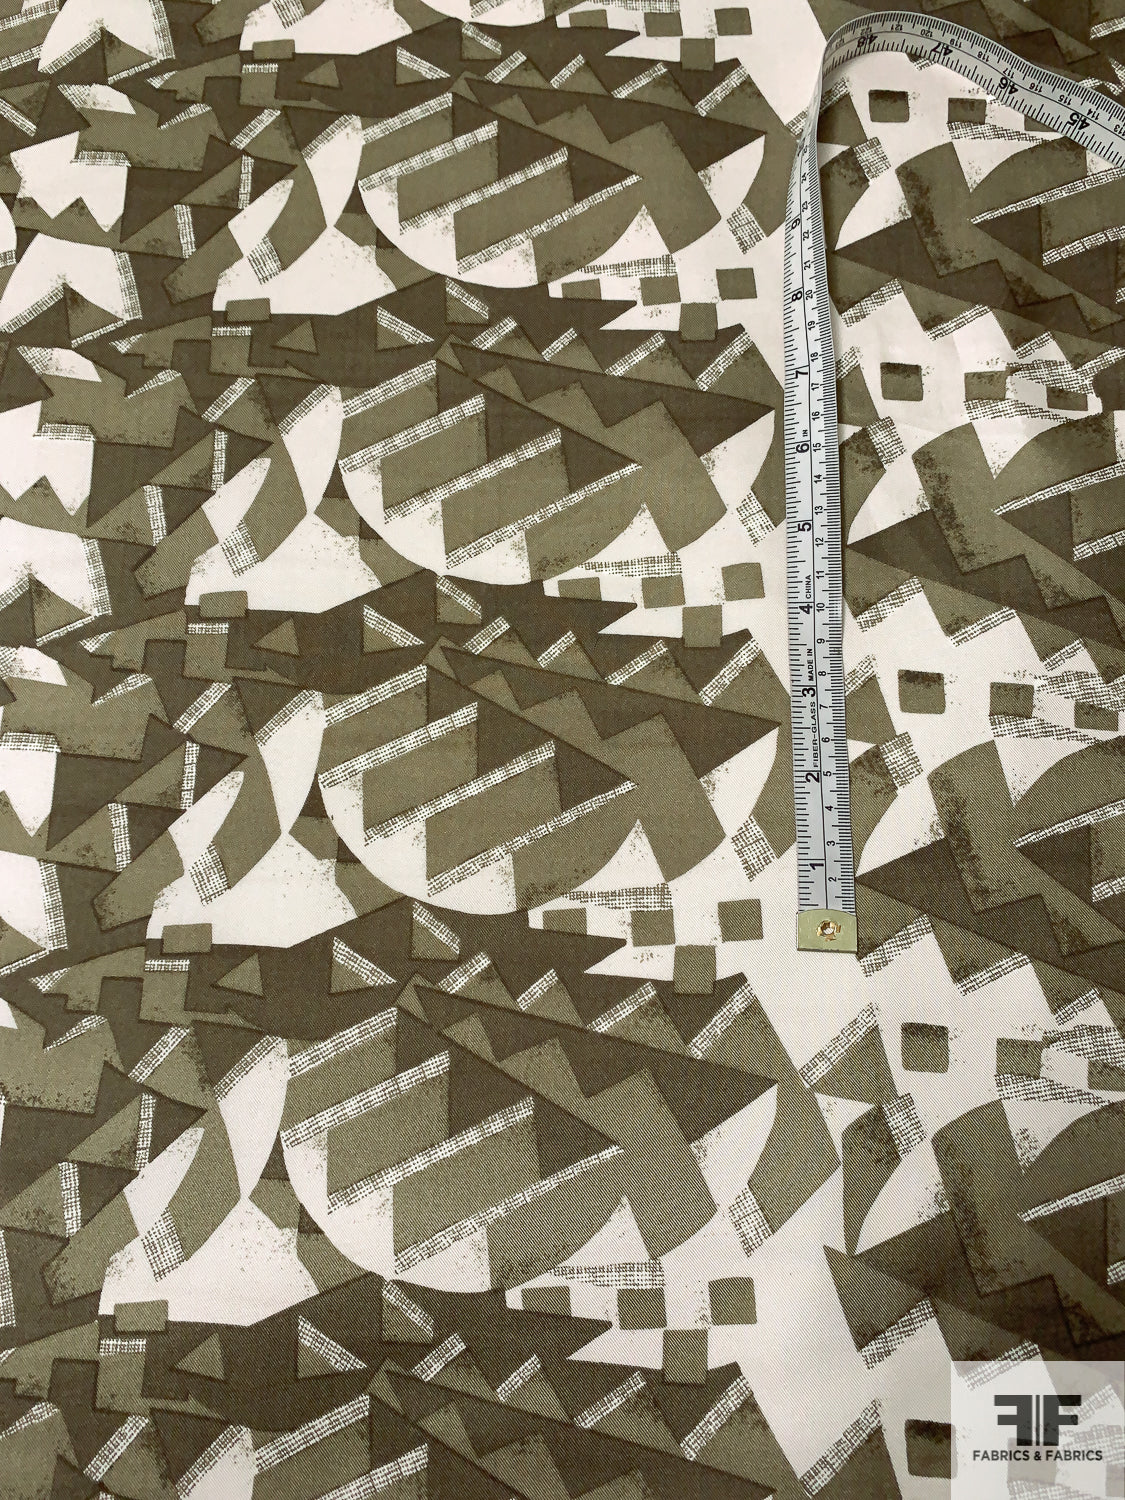 Geometric Graphic Printed Vintage Silk Twill - Shades of Olive / Off-White